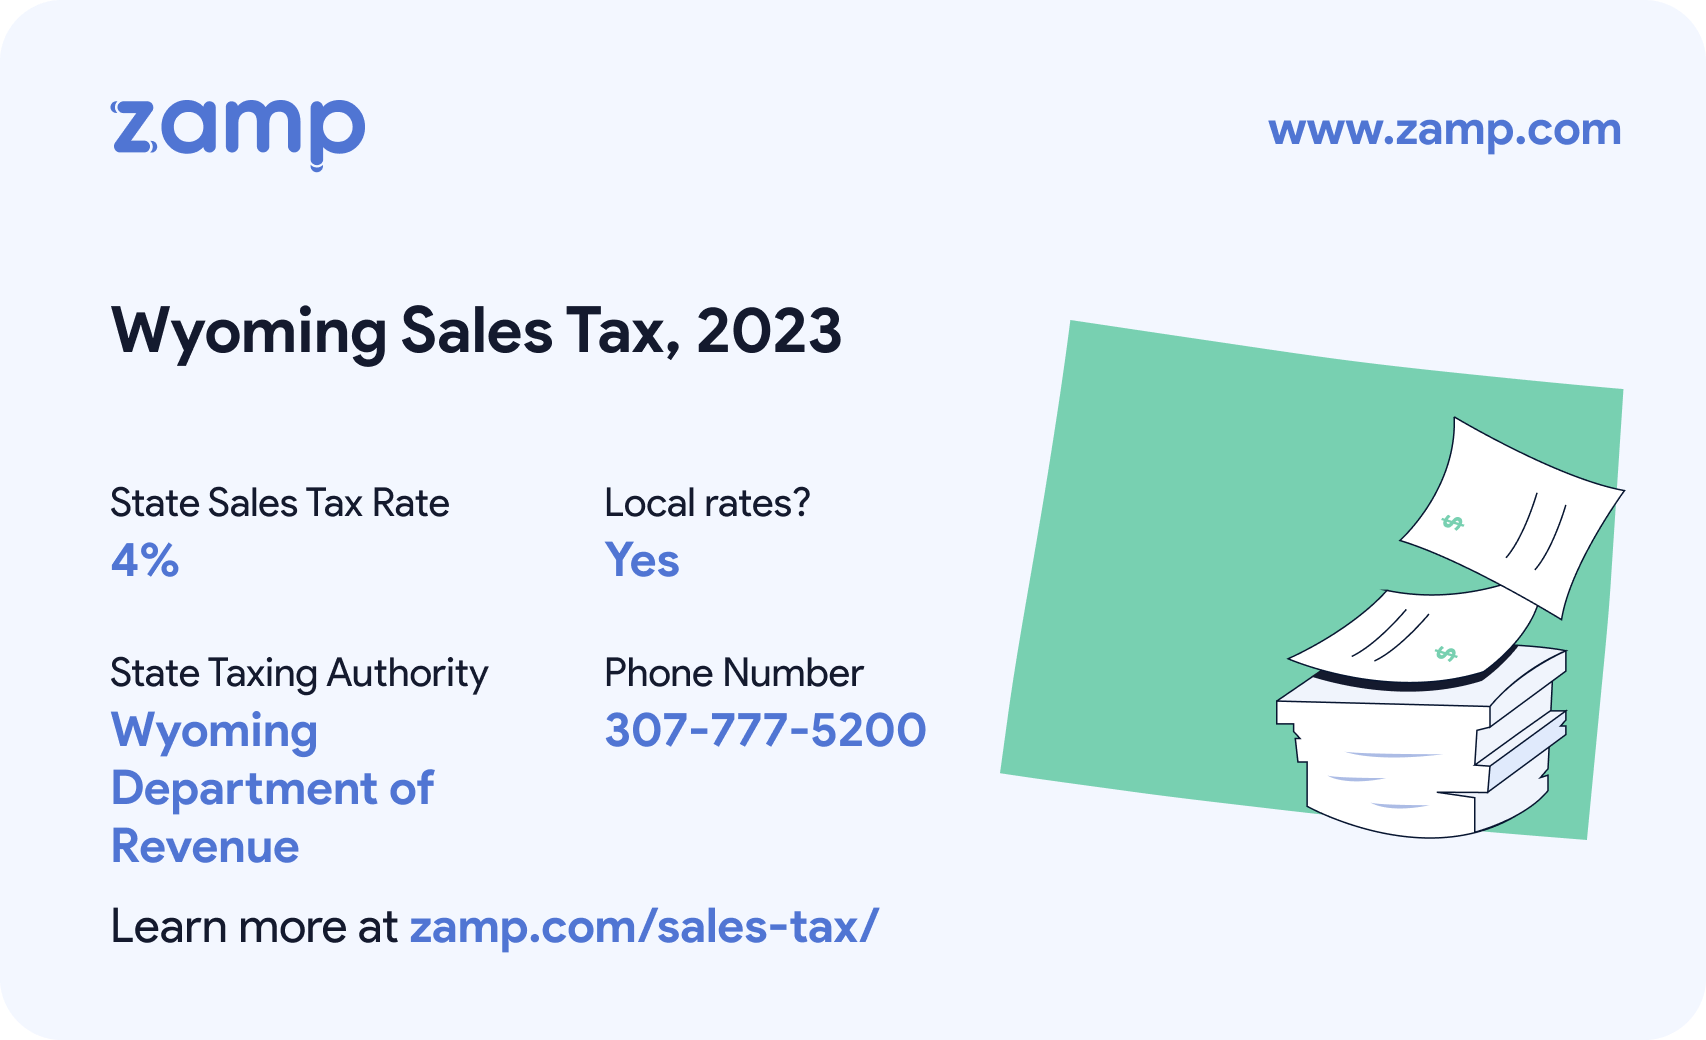 Wyoming basic sales tax info for 2023 - State sales tax rate: 4%, Local rates? Yes; State Taxing Authority: Wyoming Department of Revenue; and phone number: 307-777-5200